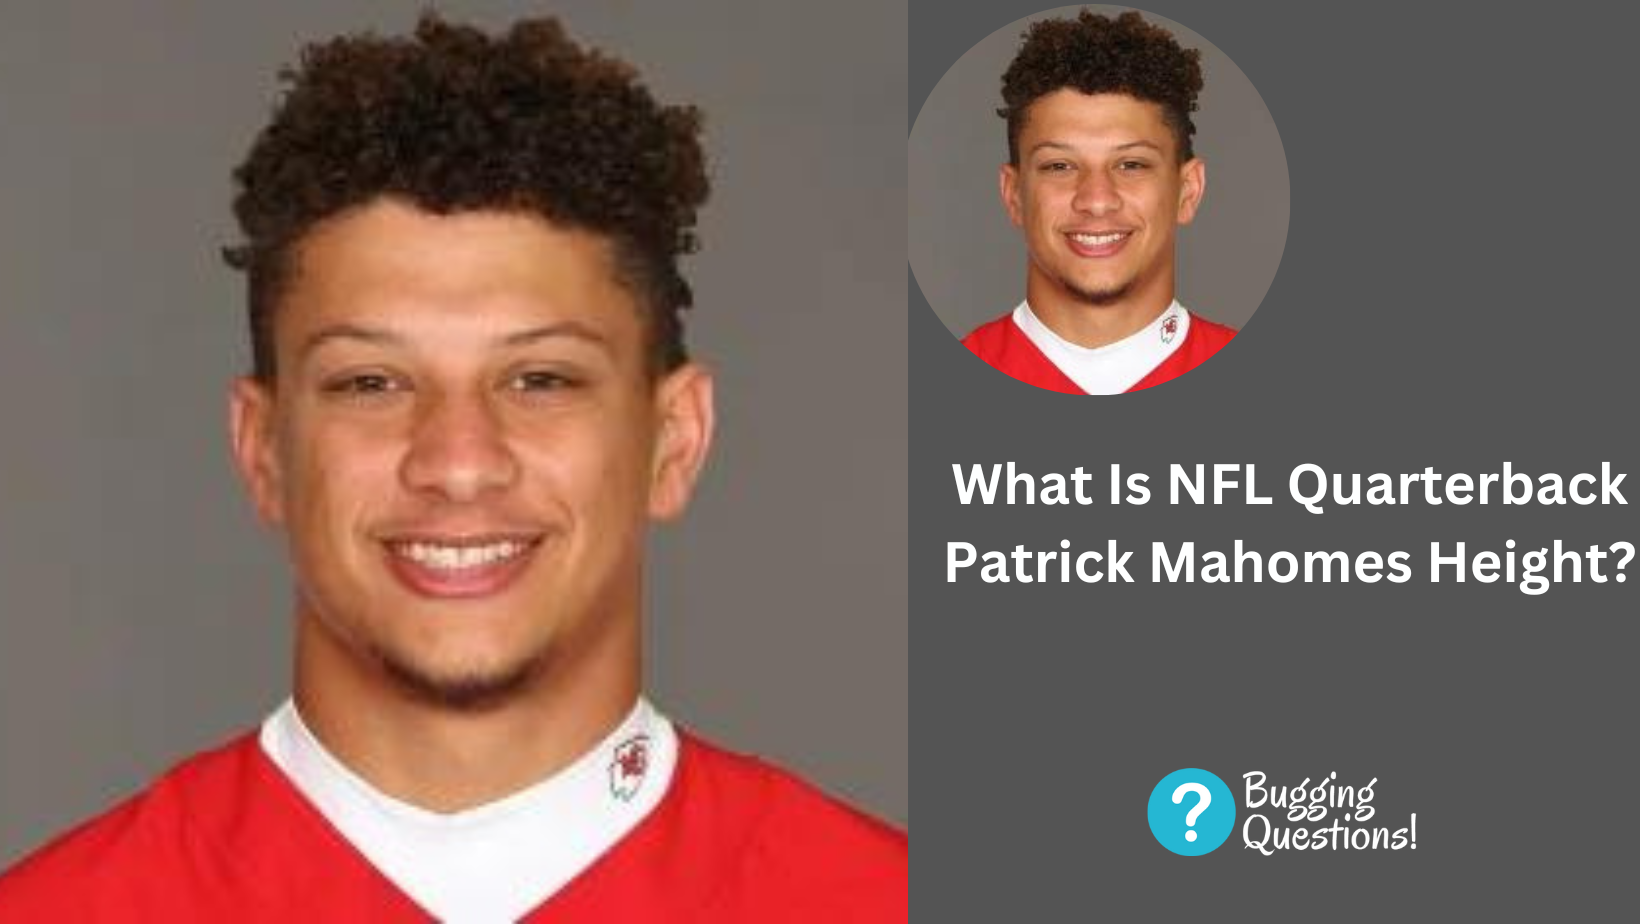 What Is NFL Quarterback Patrick Mahomes Height?